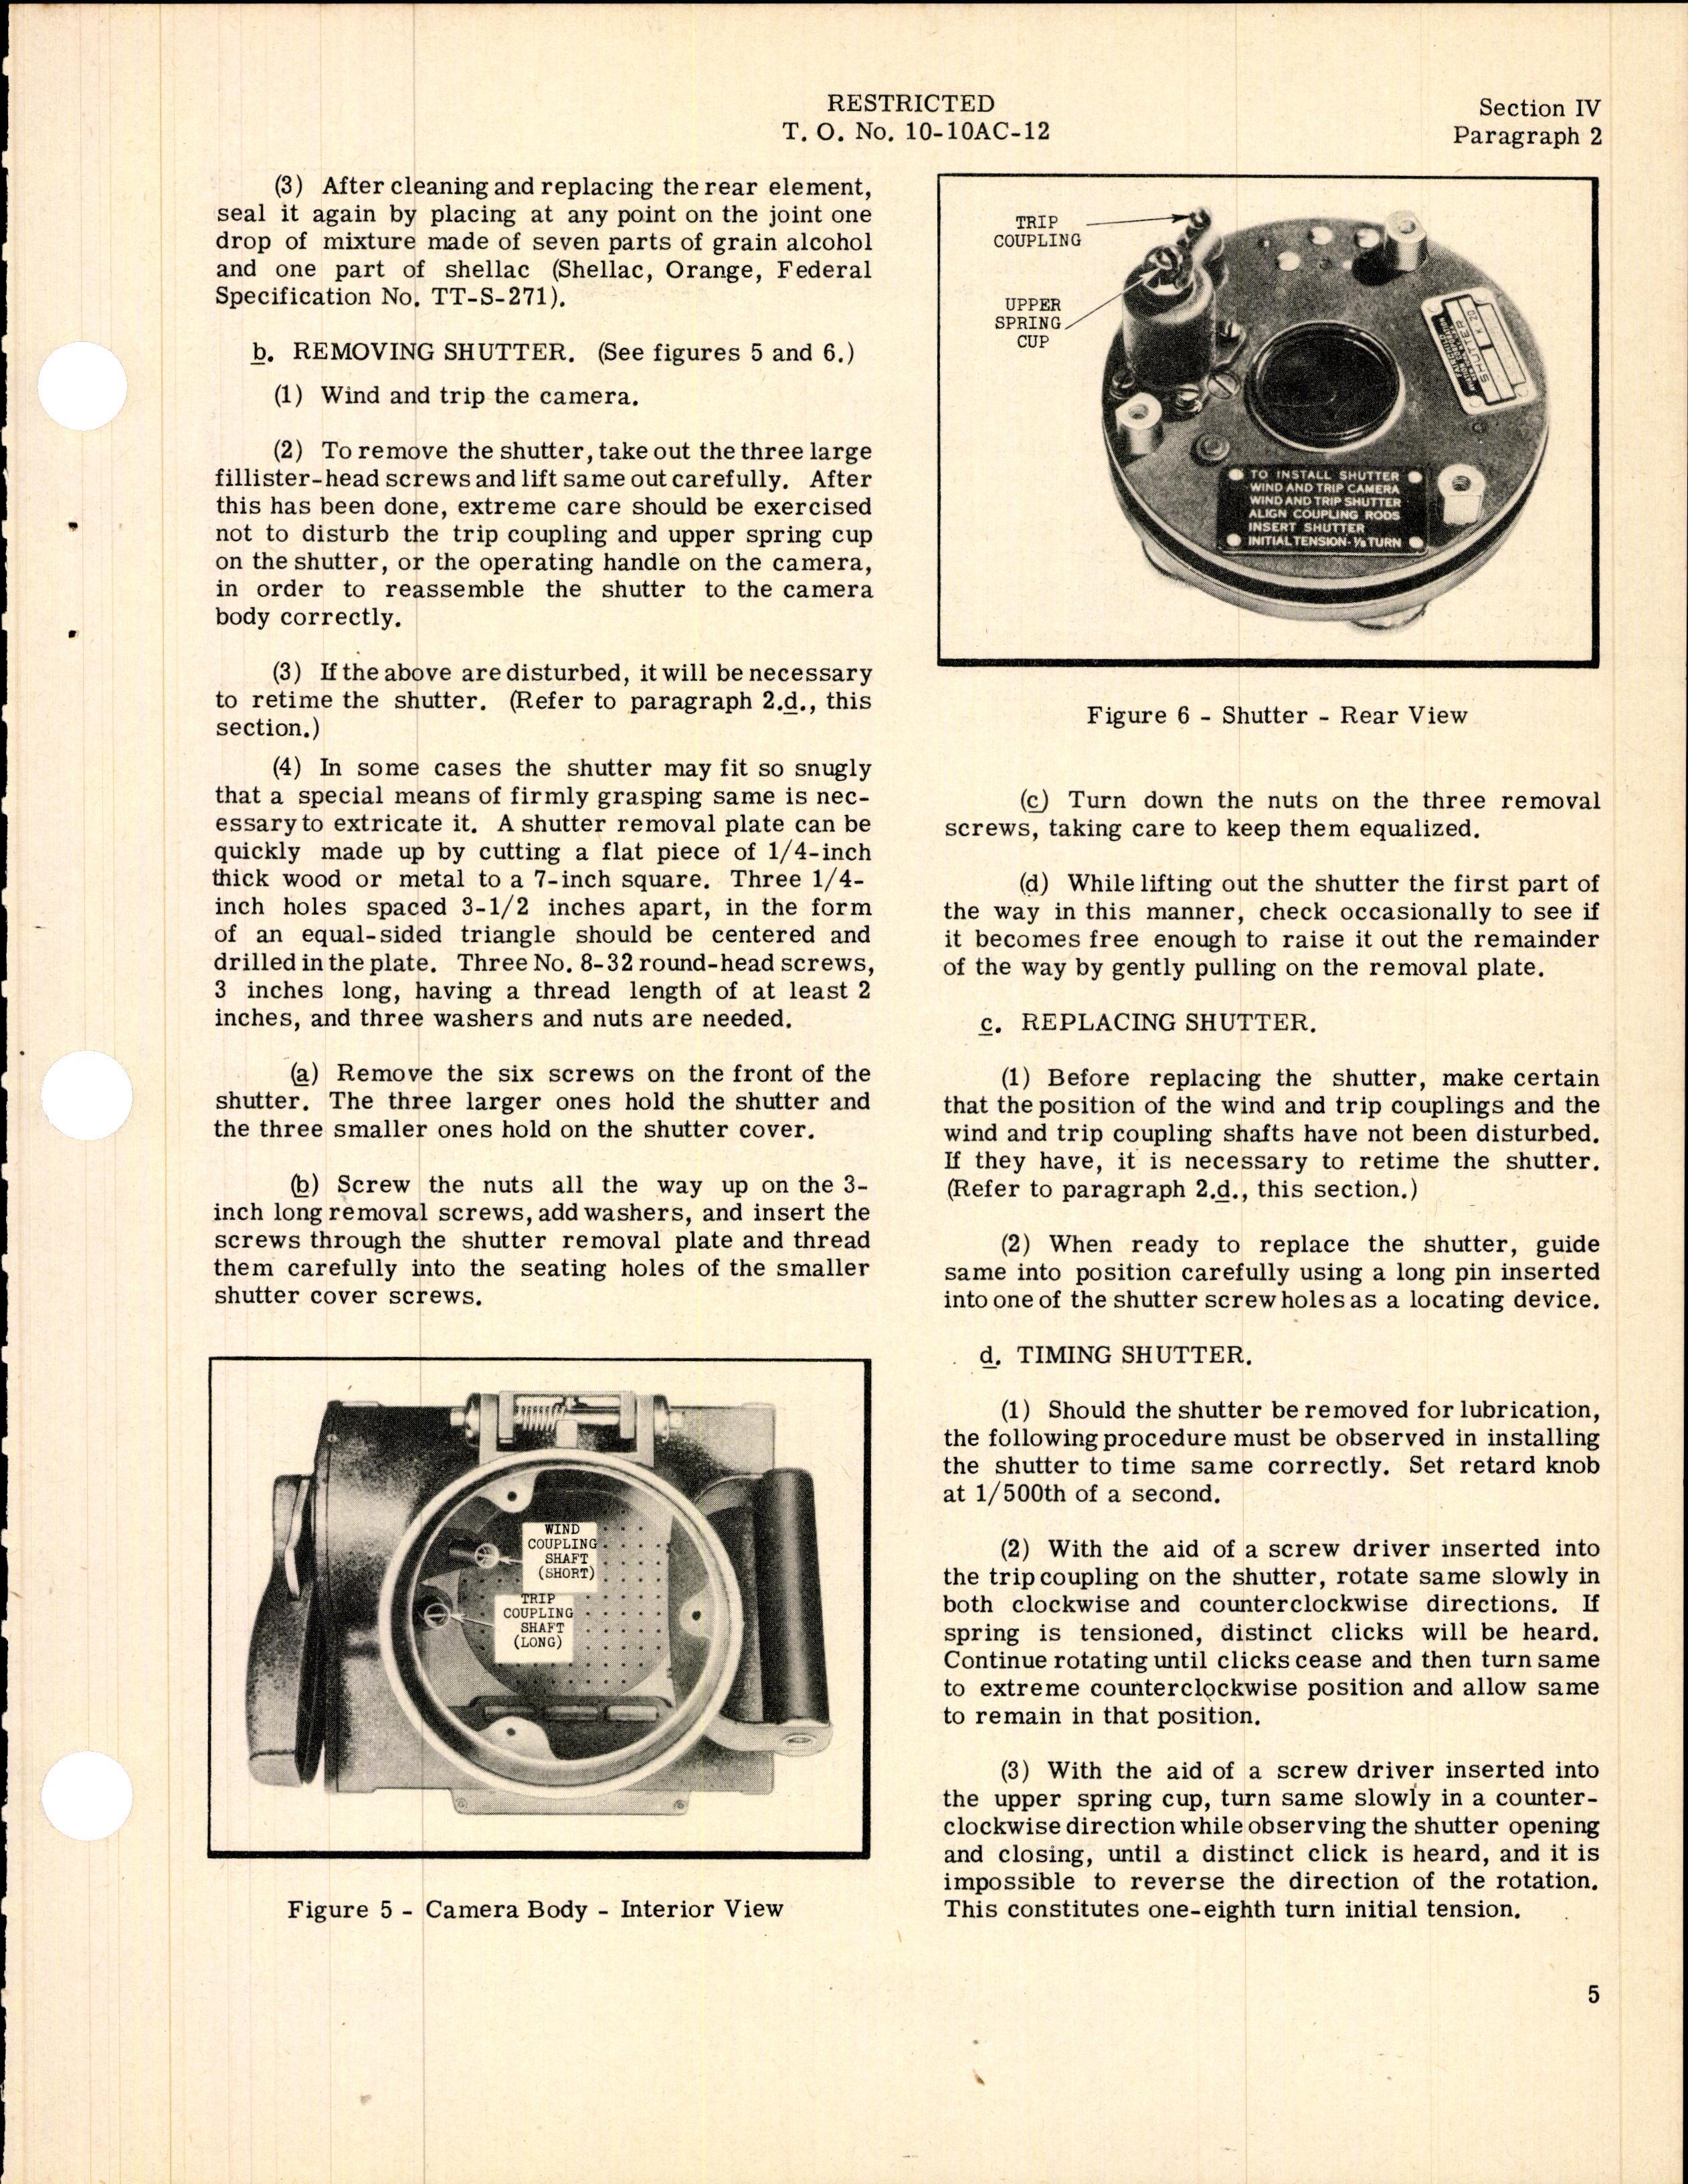 Sample page 7 from AirCorps Library document: Oper, Service & Overhaul w/ Parts Catalog for Type K-20 Aircraft Camera